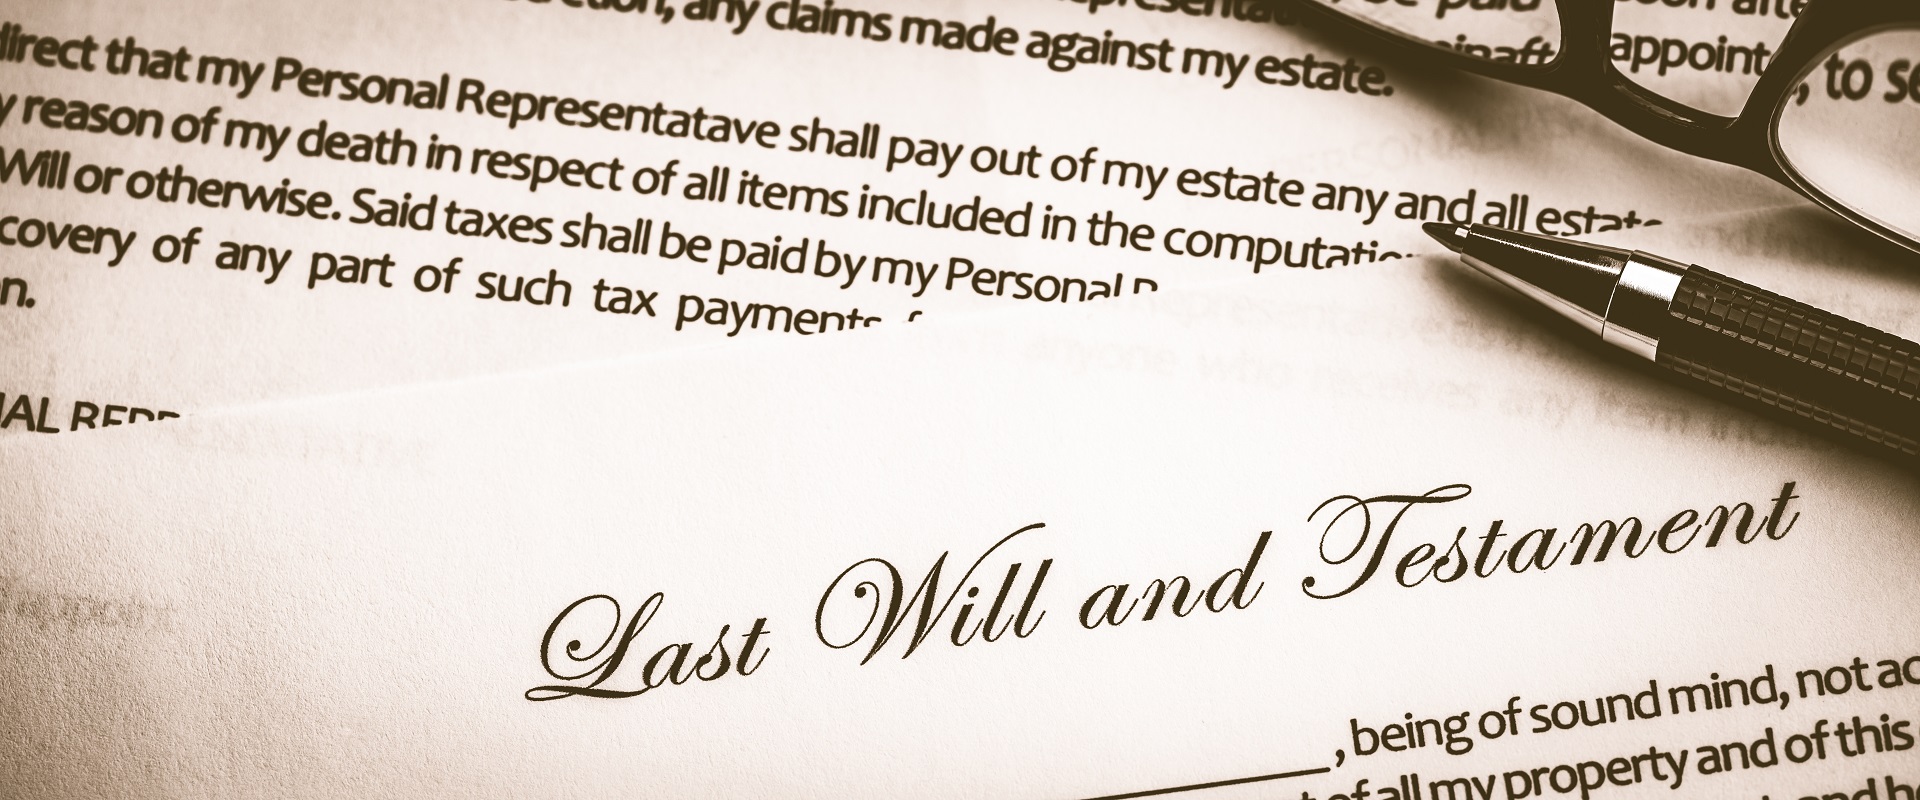 Last Will and Testament Legal Document | Elder Law Lawyer​ in Washington​​ | Legacy Law Group